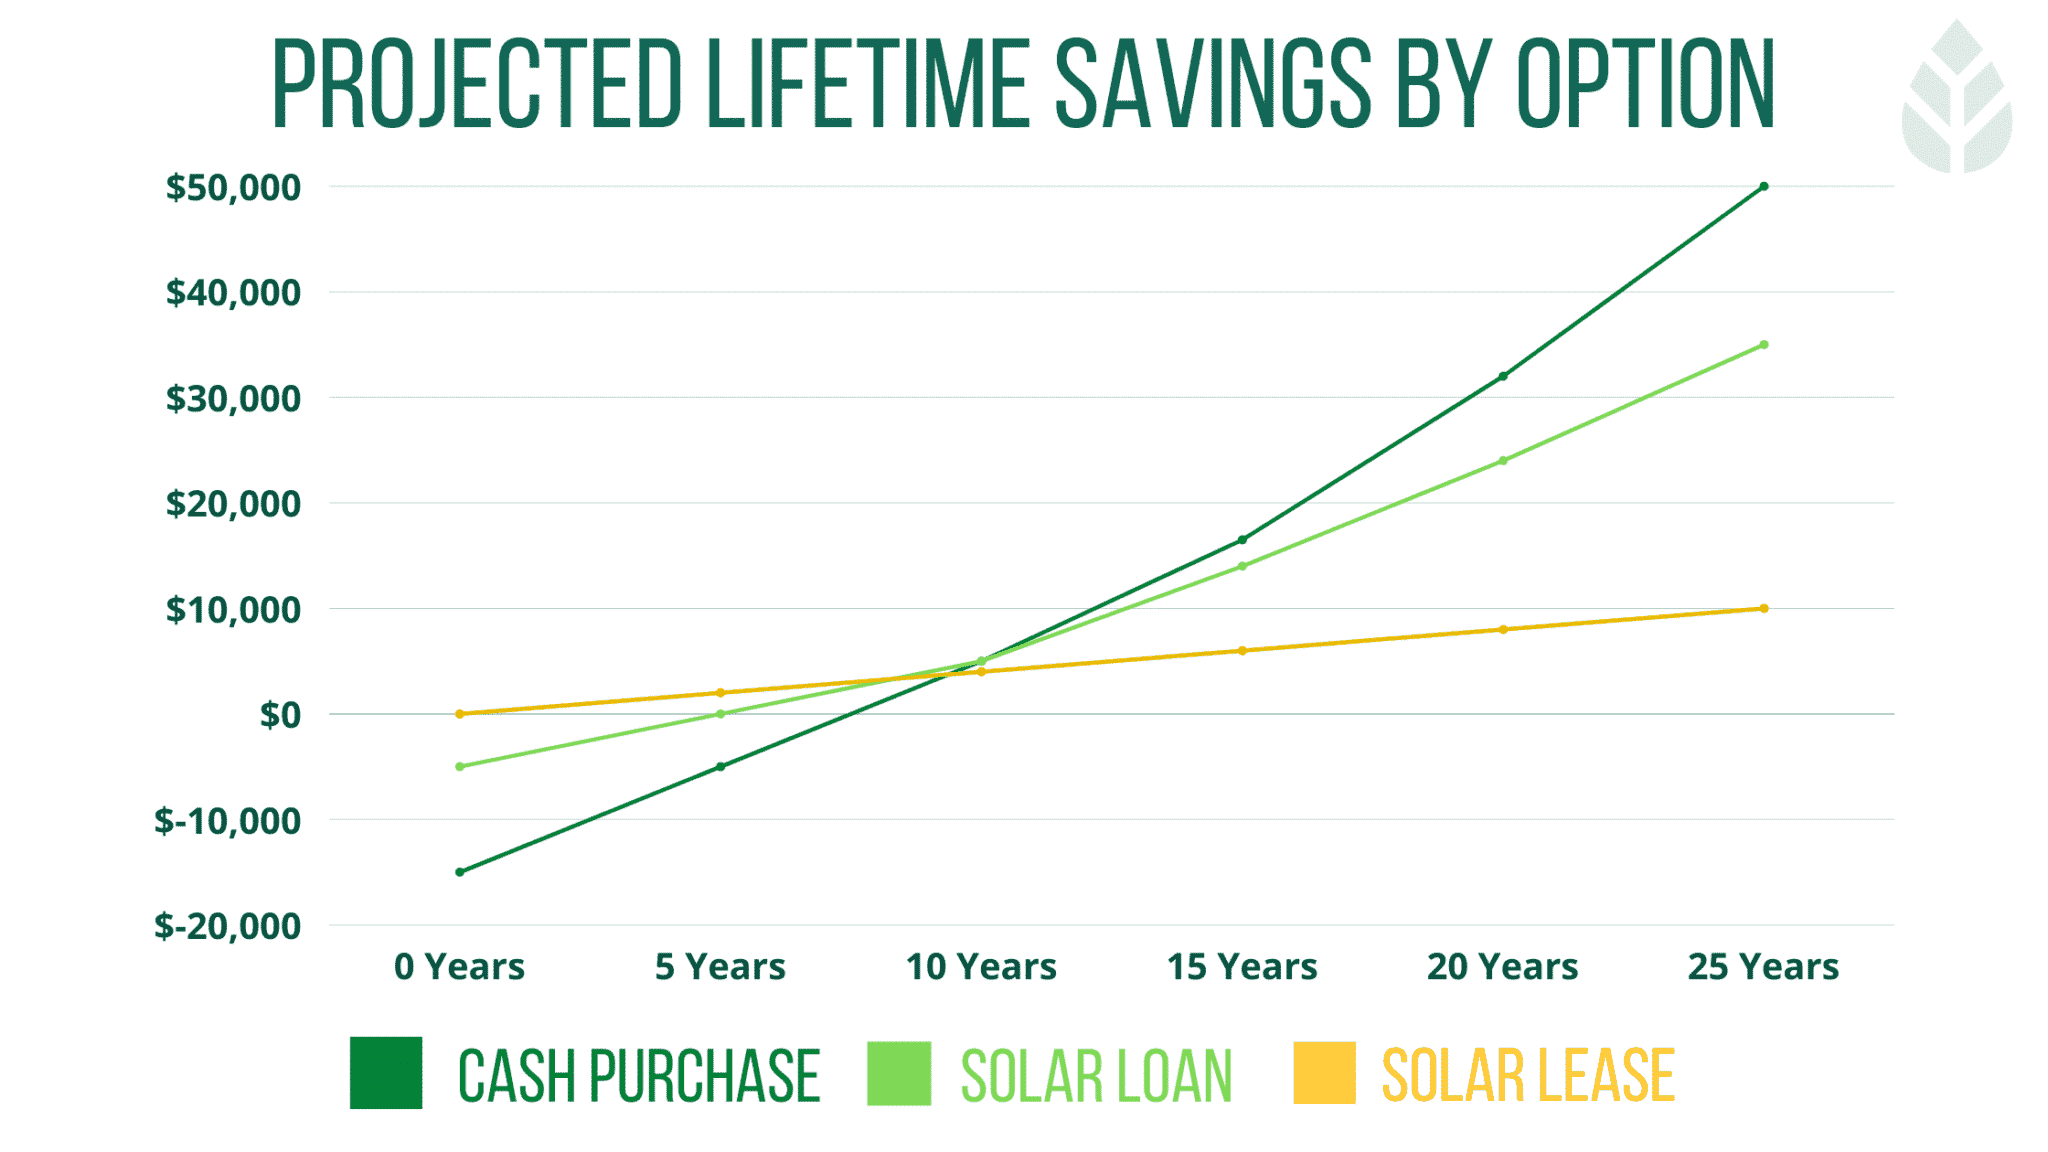 Chart with expected lifetime savings from cash purchase of solar panels, solar loan or solar rental